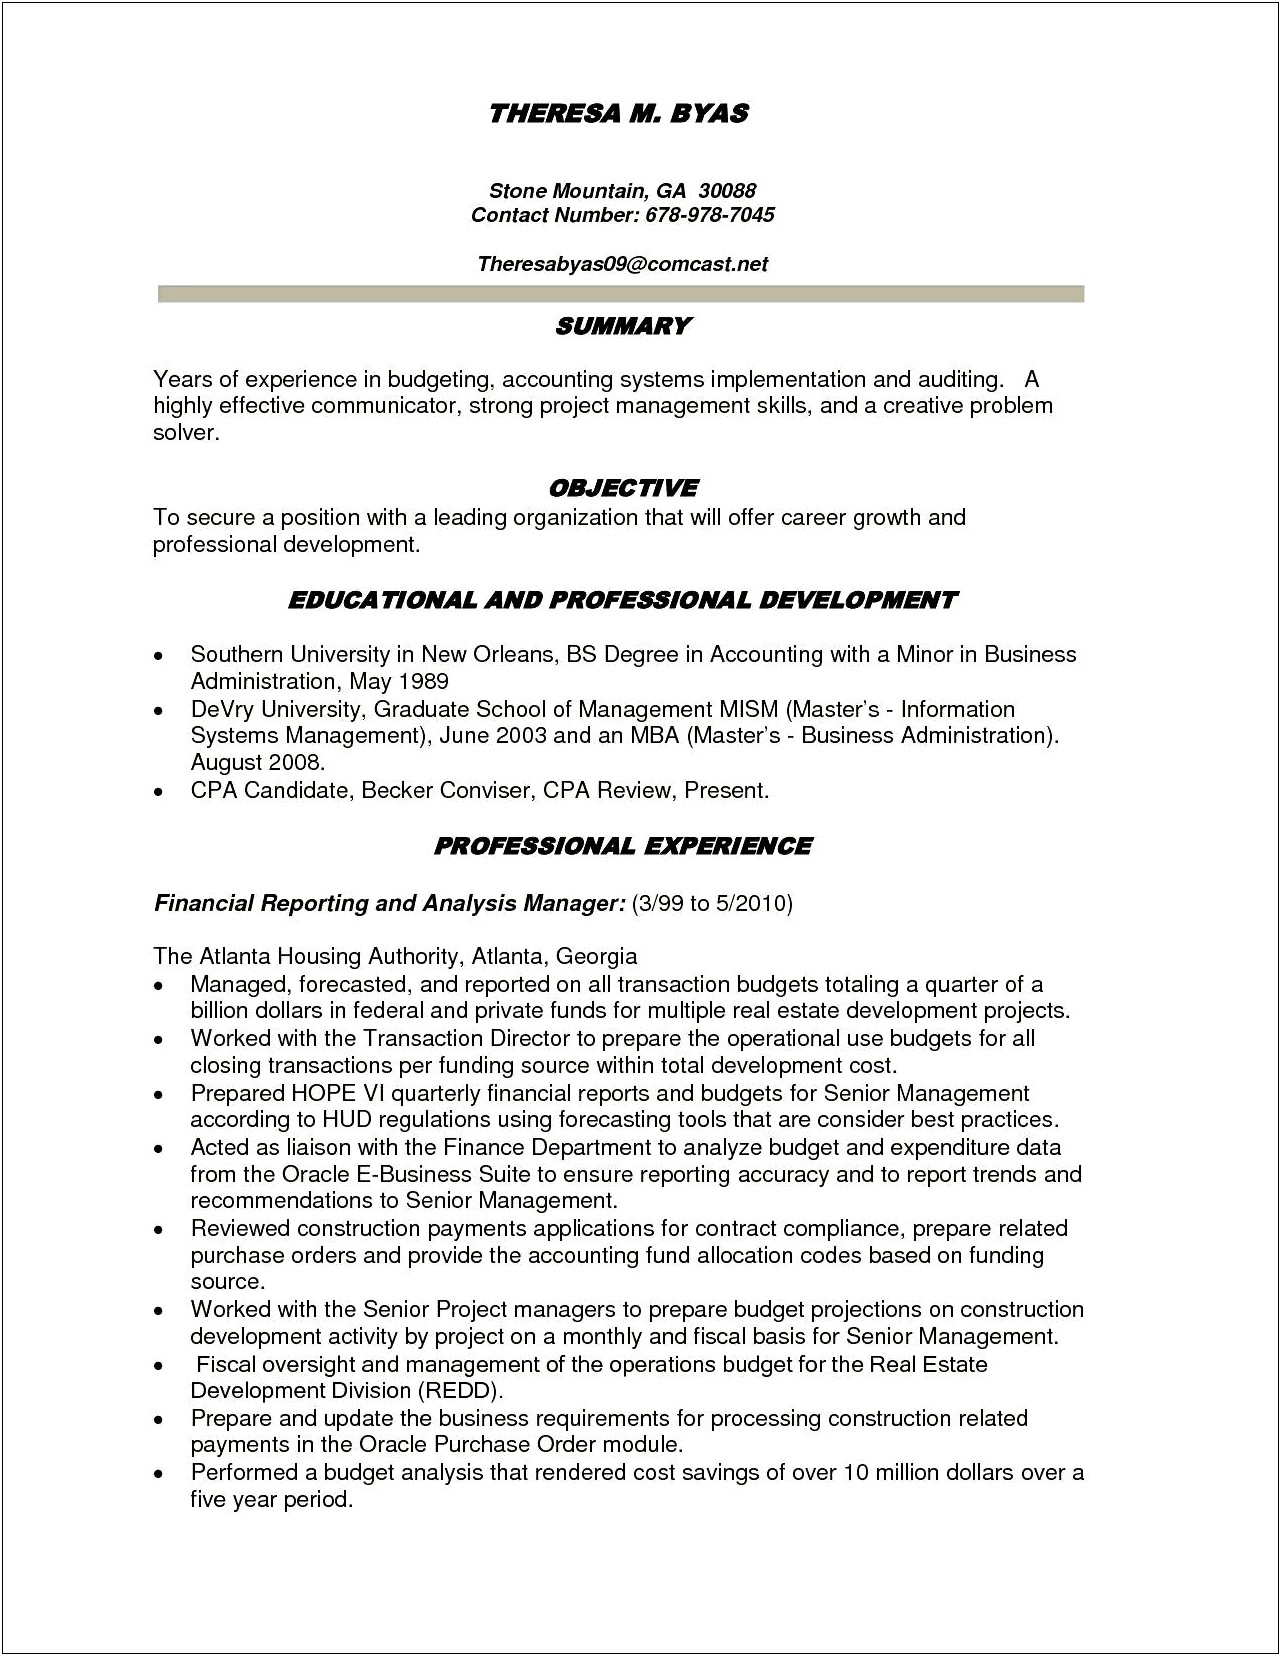 Free Resume Review New Orleans